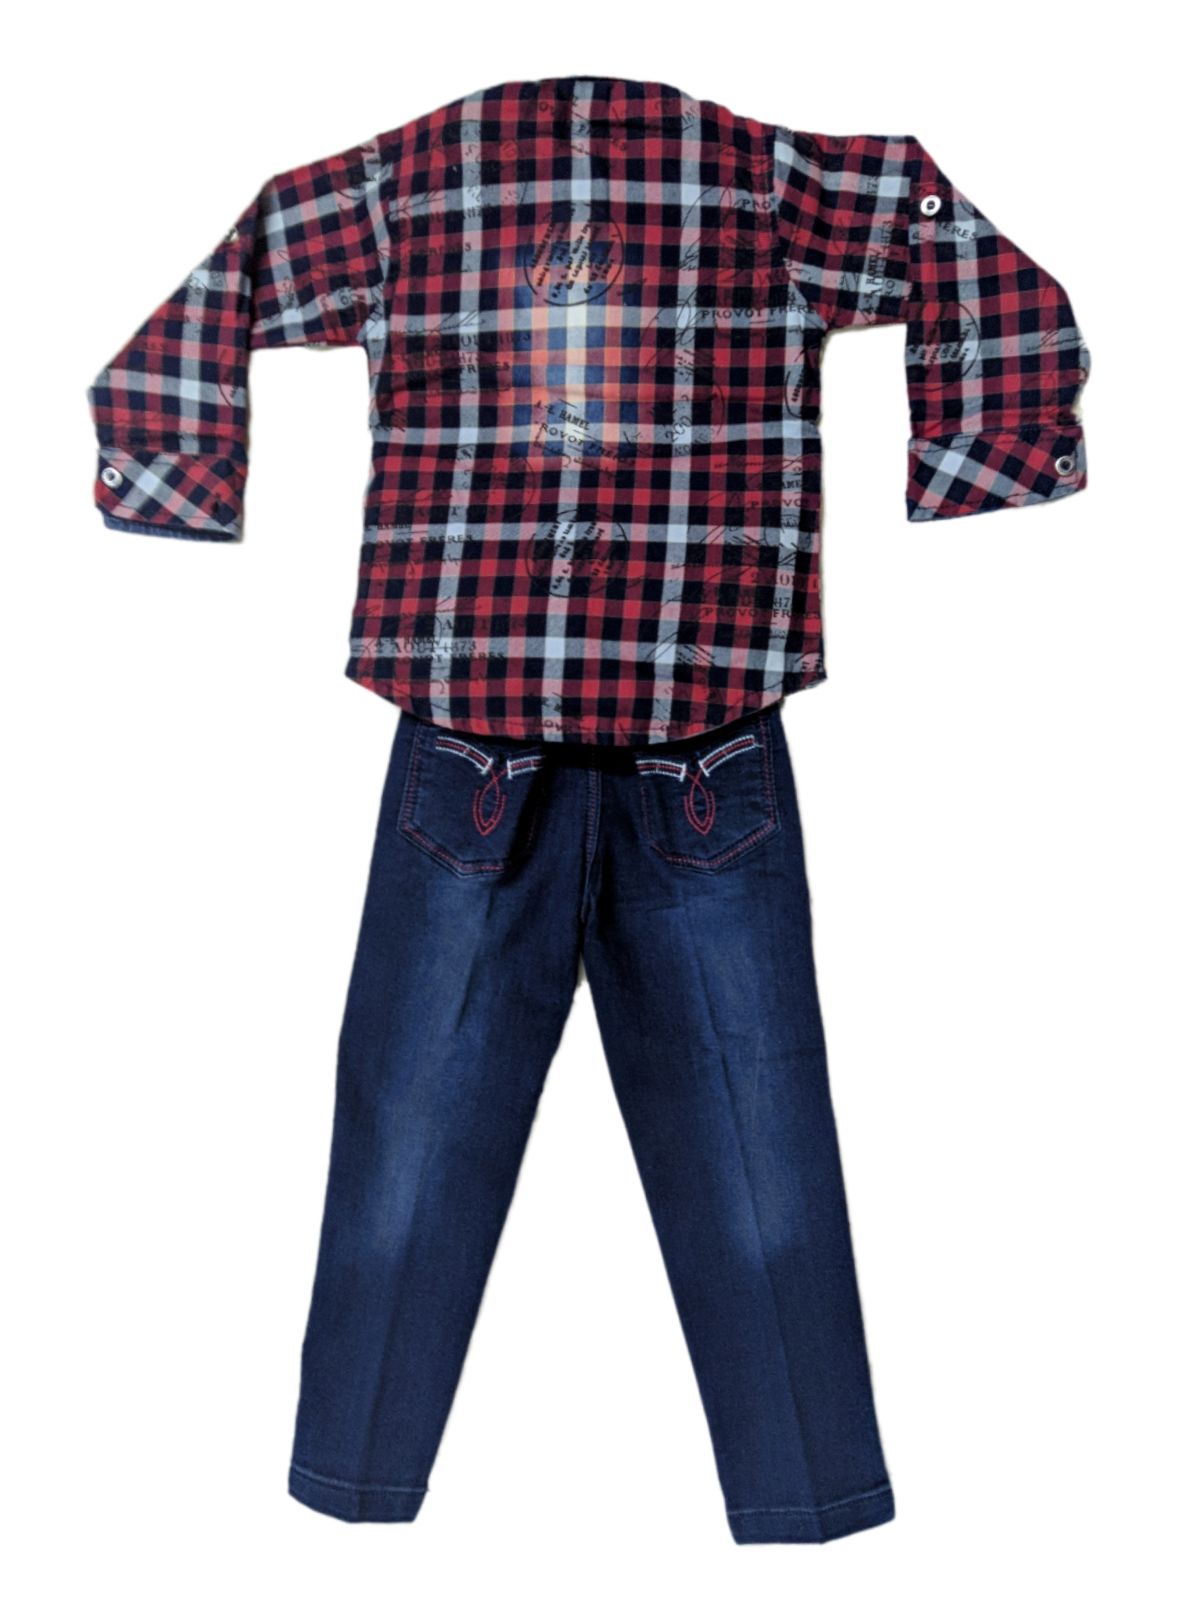 Boys Shirt & Jeans Combo 4-5 Years-205024R